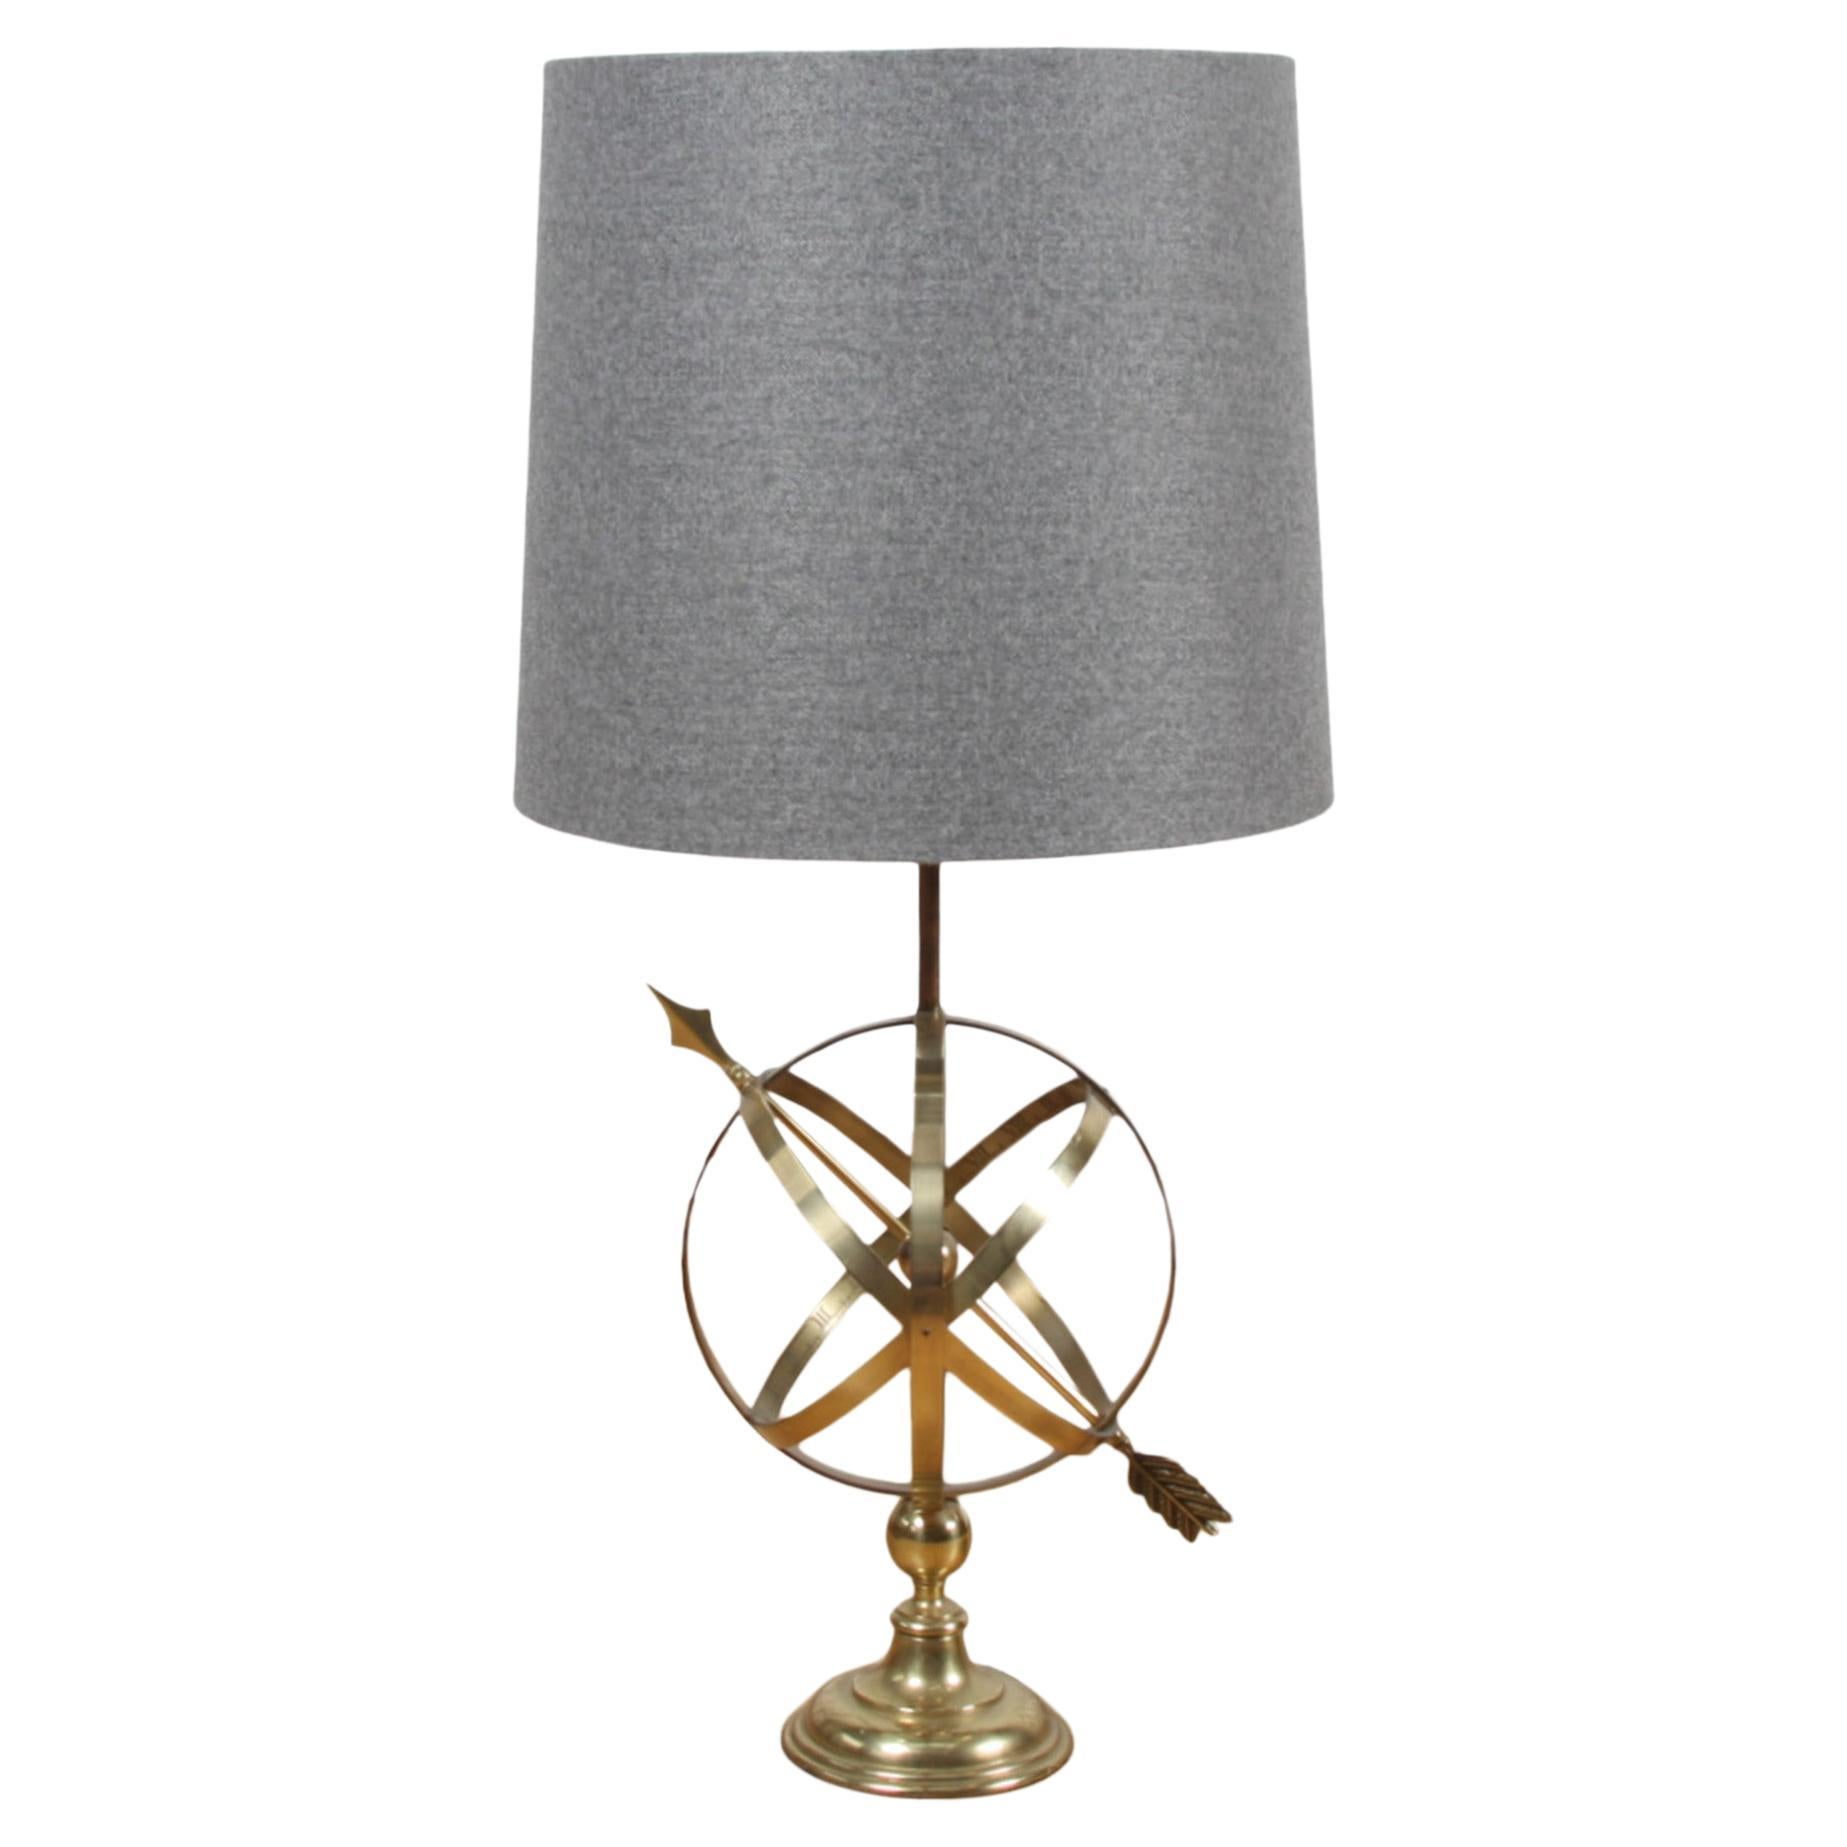 English 1950s Armillary Table Lamp For Sale